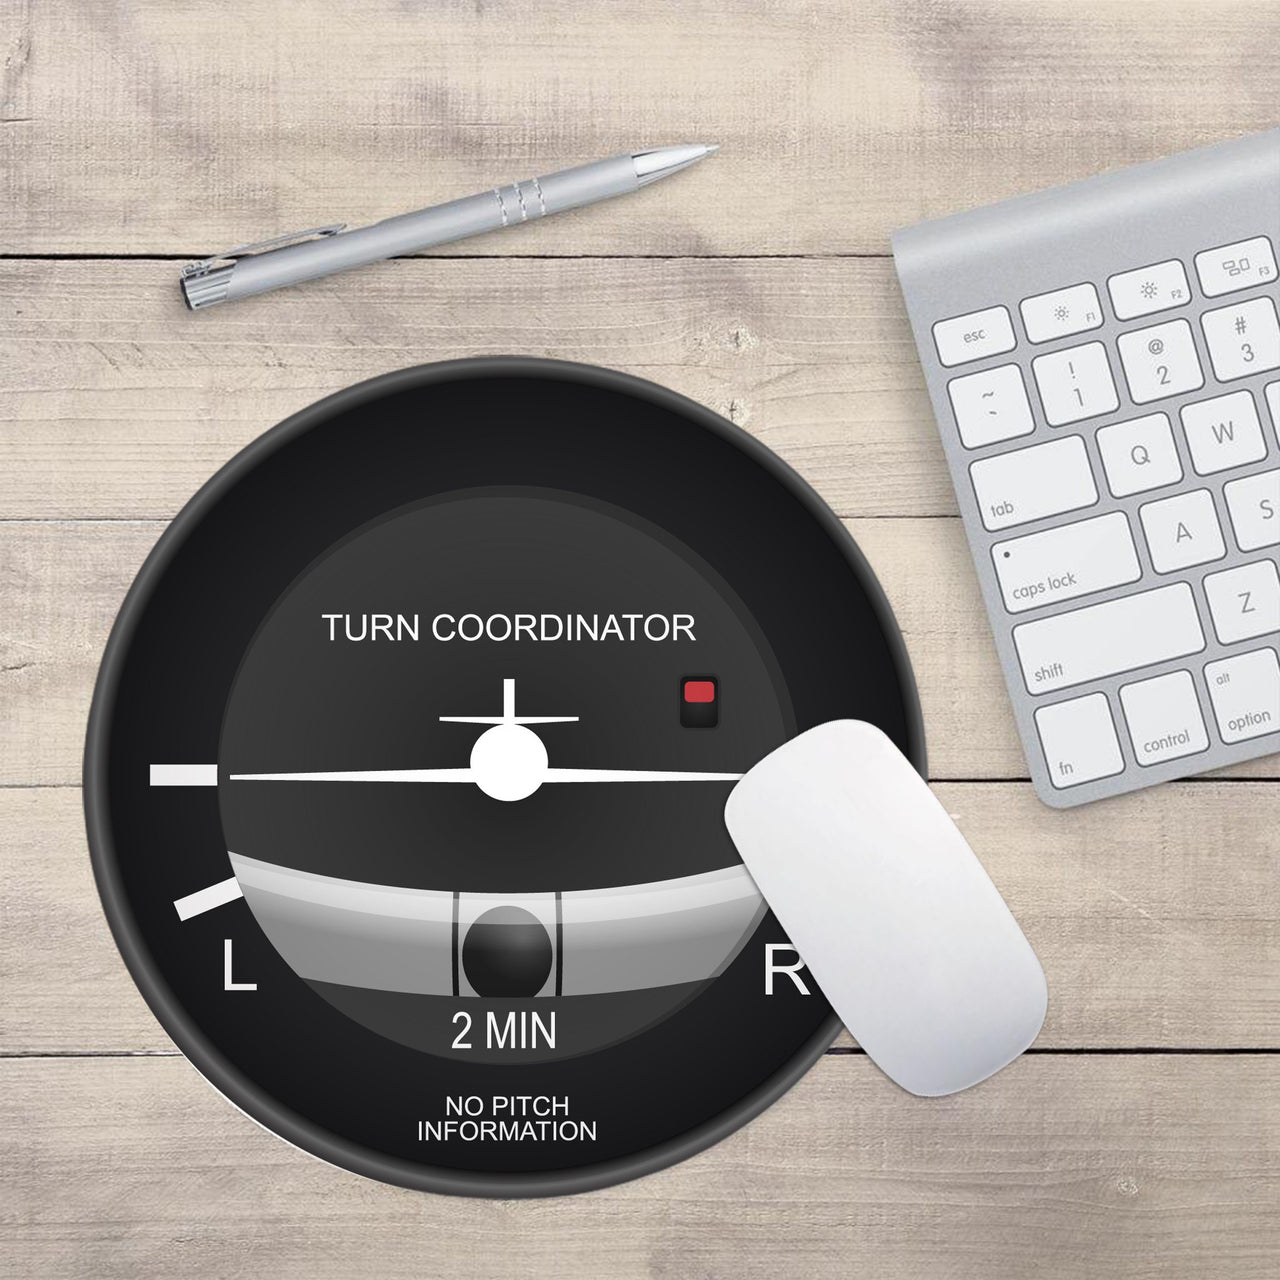 Airplane Instrument Series "Turn Coordinator 2" Designed Mouse Pads Pilot Eyes Store 